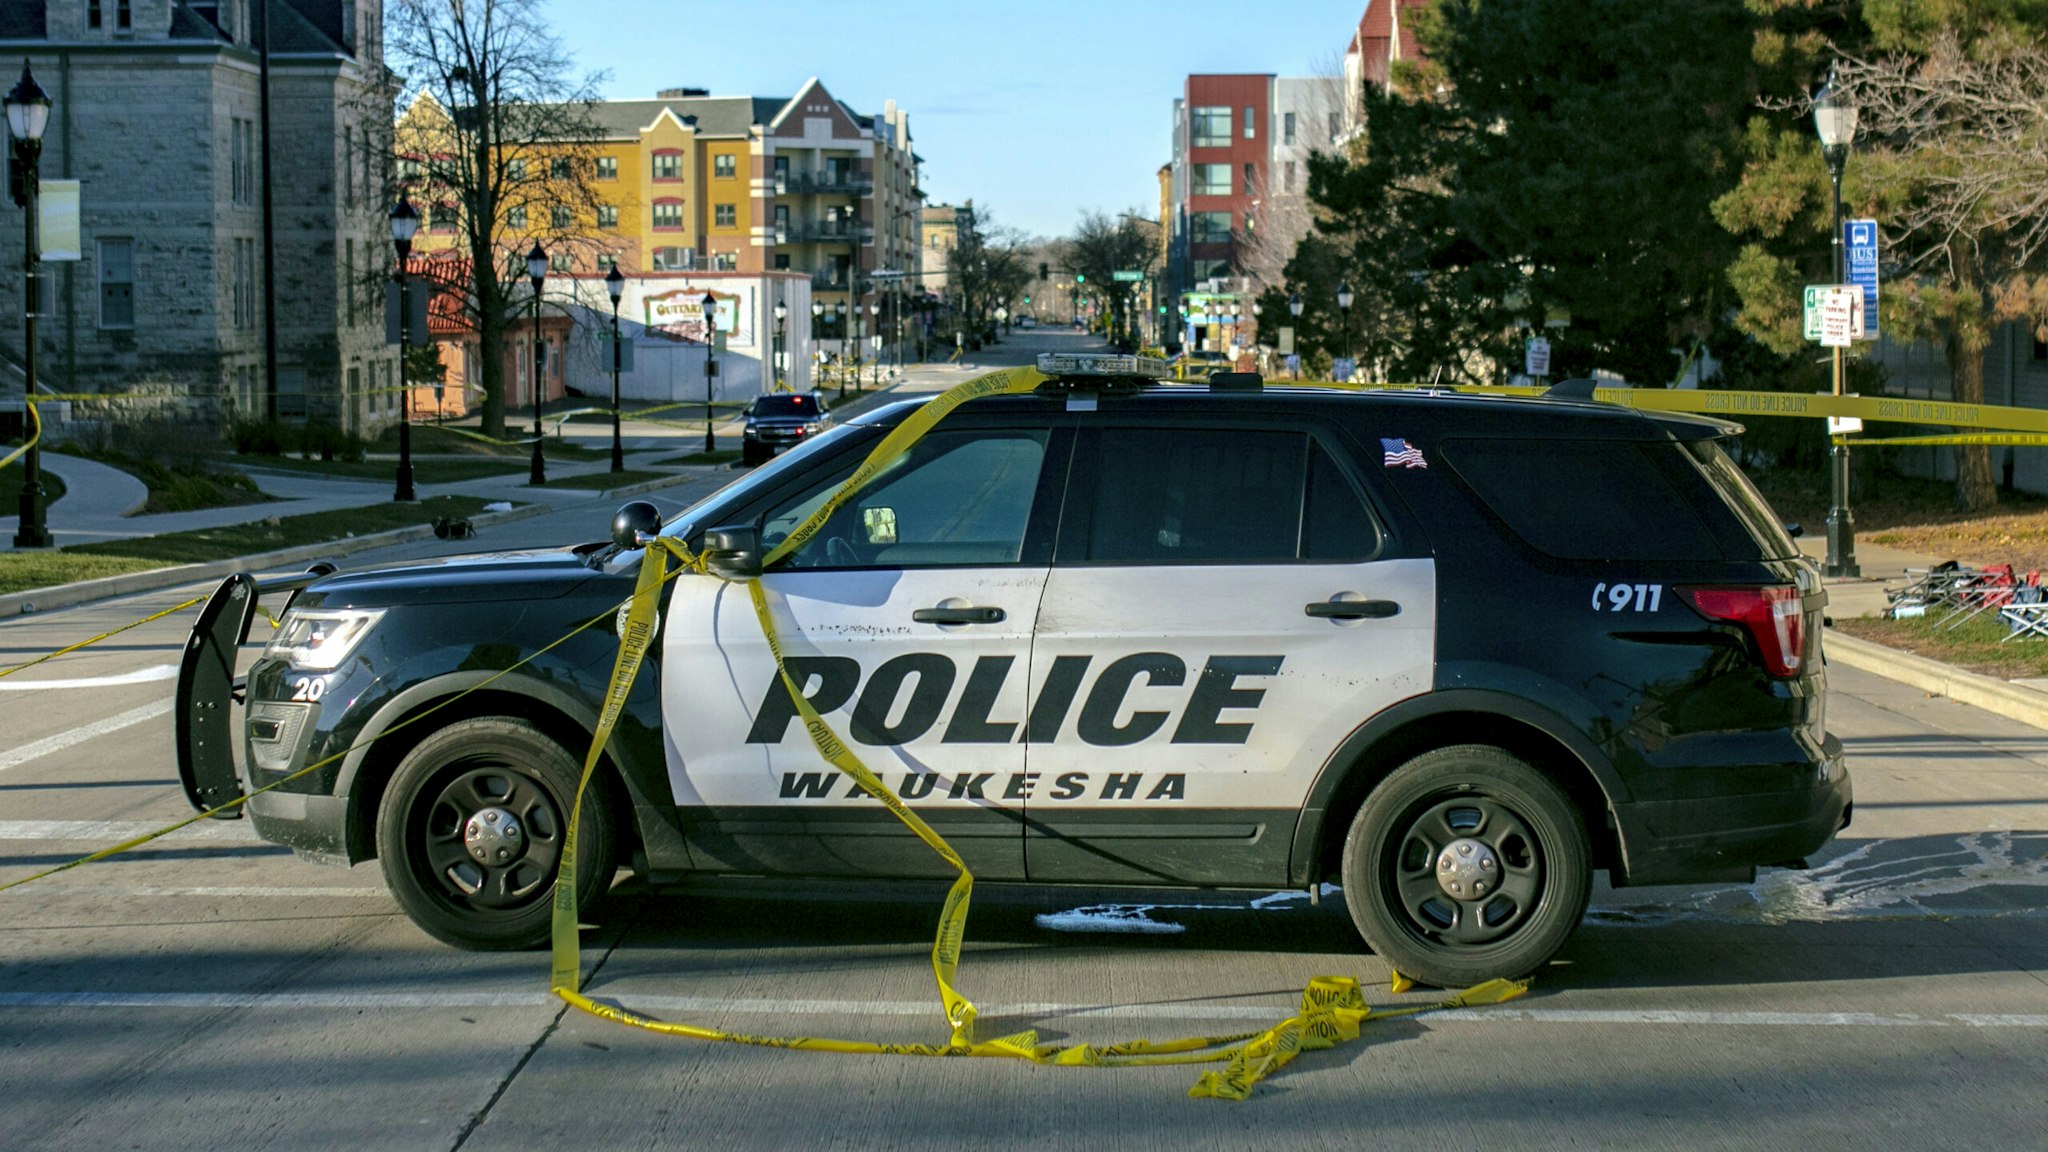 WAUKESHA, WI - NOVEMBER 22: Police block off road entrances following a driver plowing into the Christmas parade on Main Street in downtown November 22, 2021 in Waukesha, Wisconsin. Five people were left dead after a person driving an S.U.V. entered the parade route and proceeded to strike dozens of people.